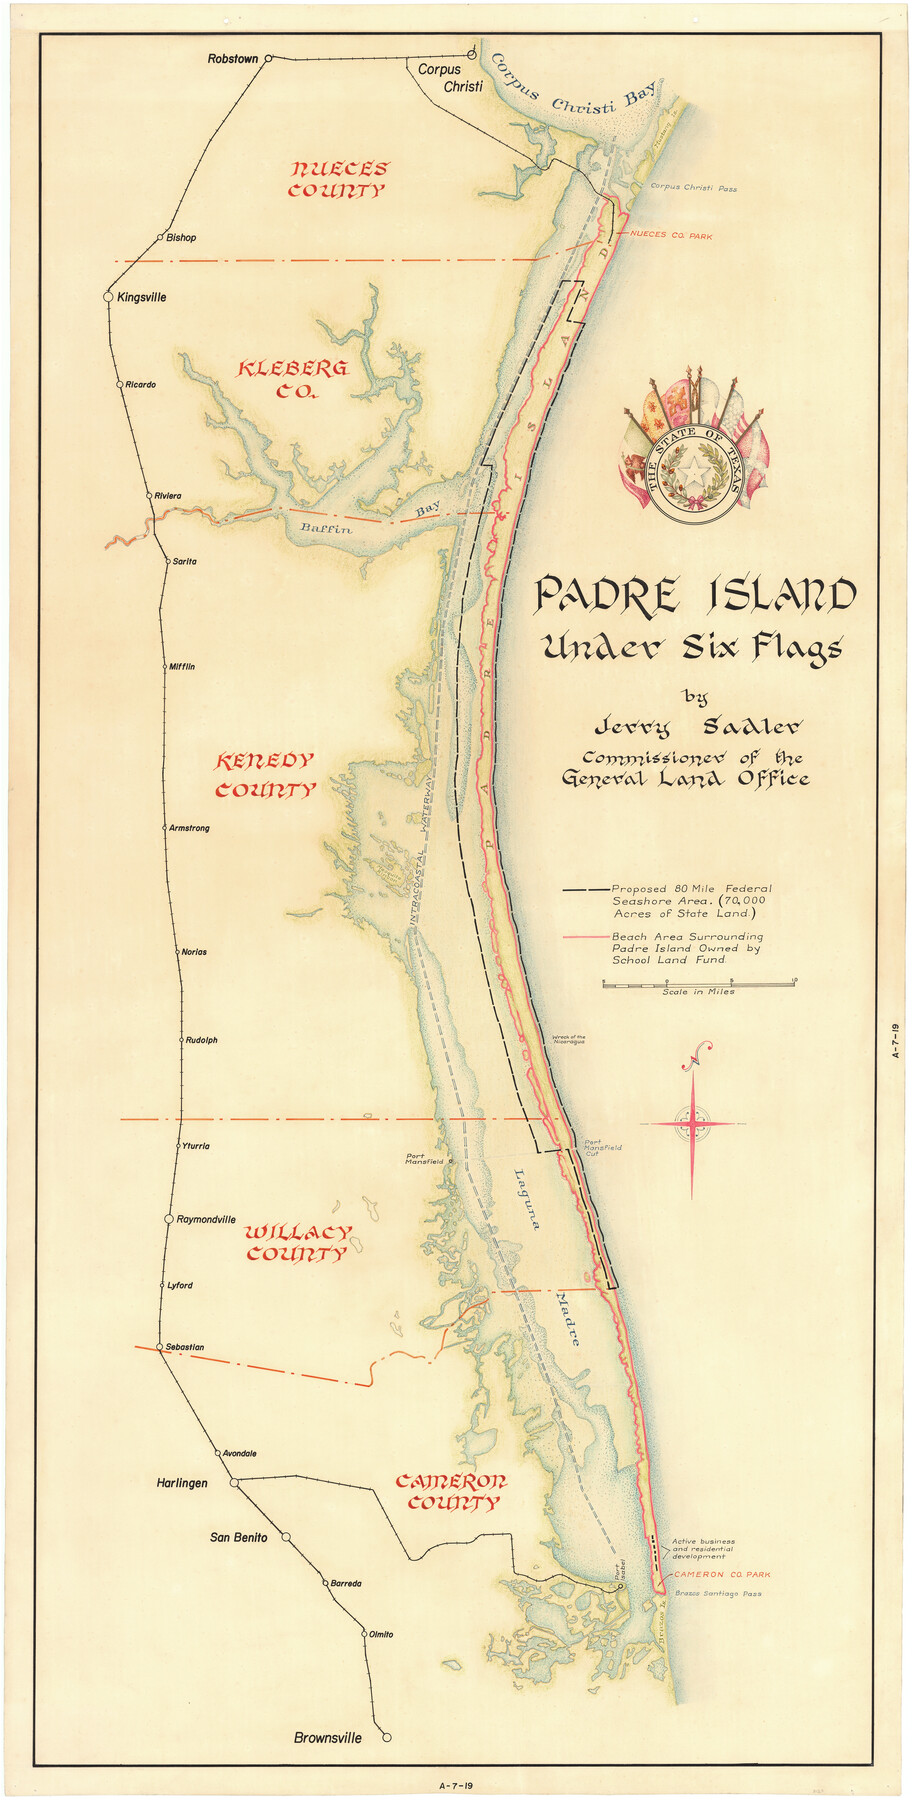 3123, Padre Island Under Six Flags, General Map Collection